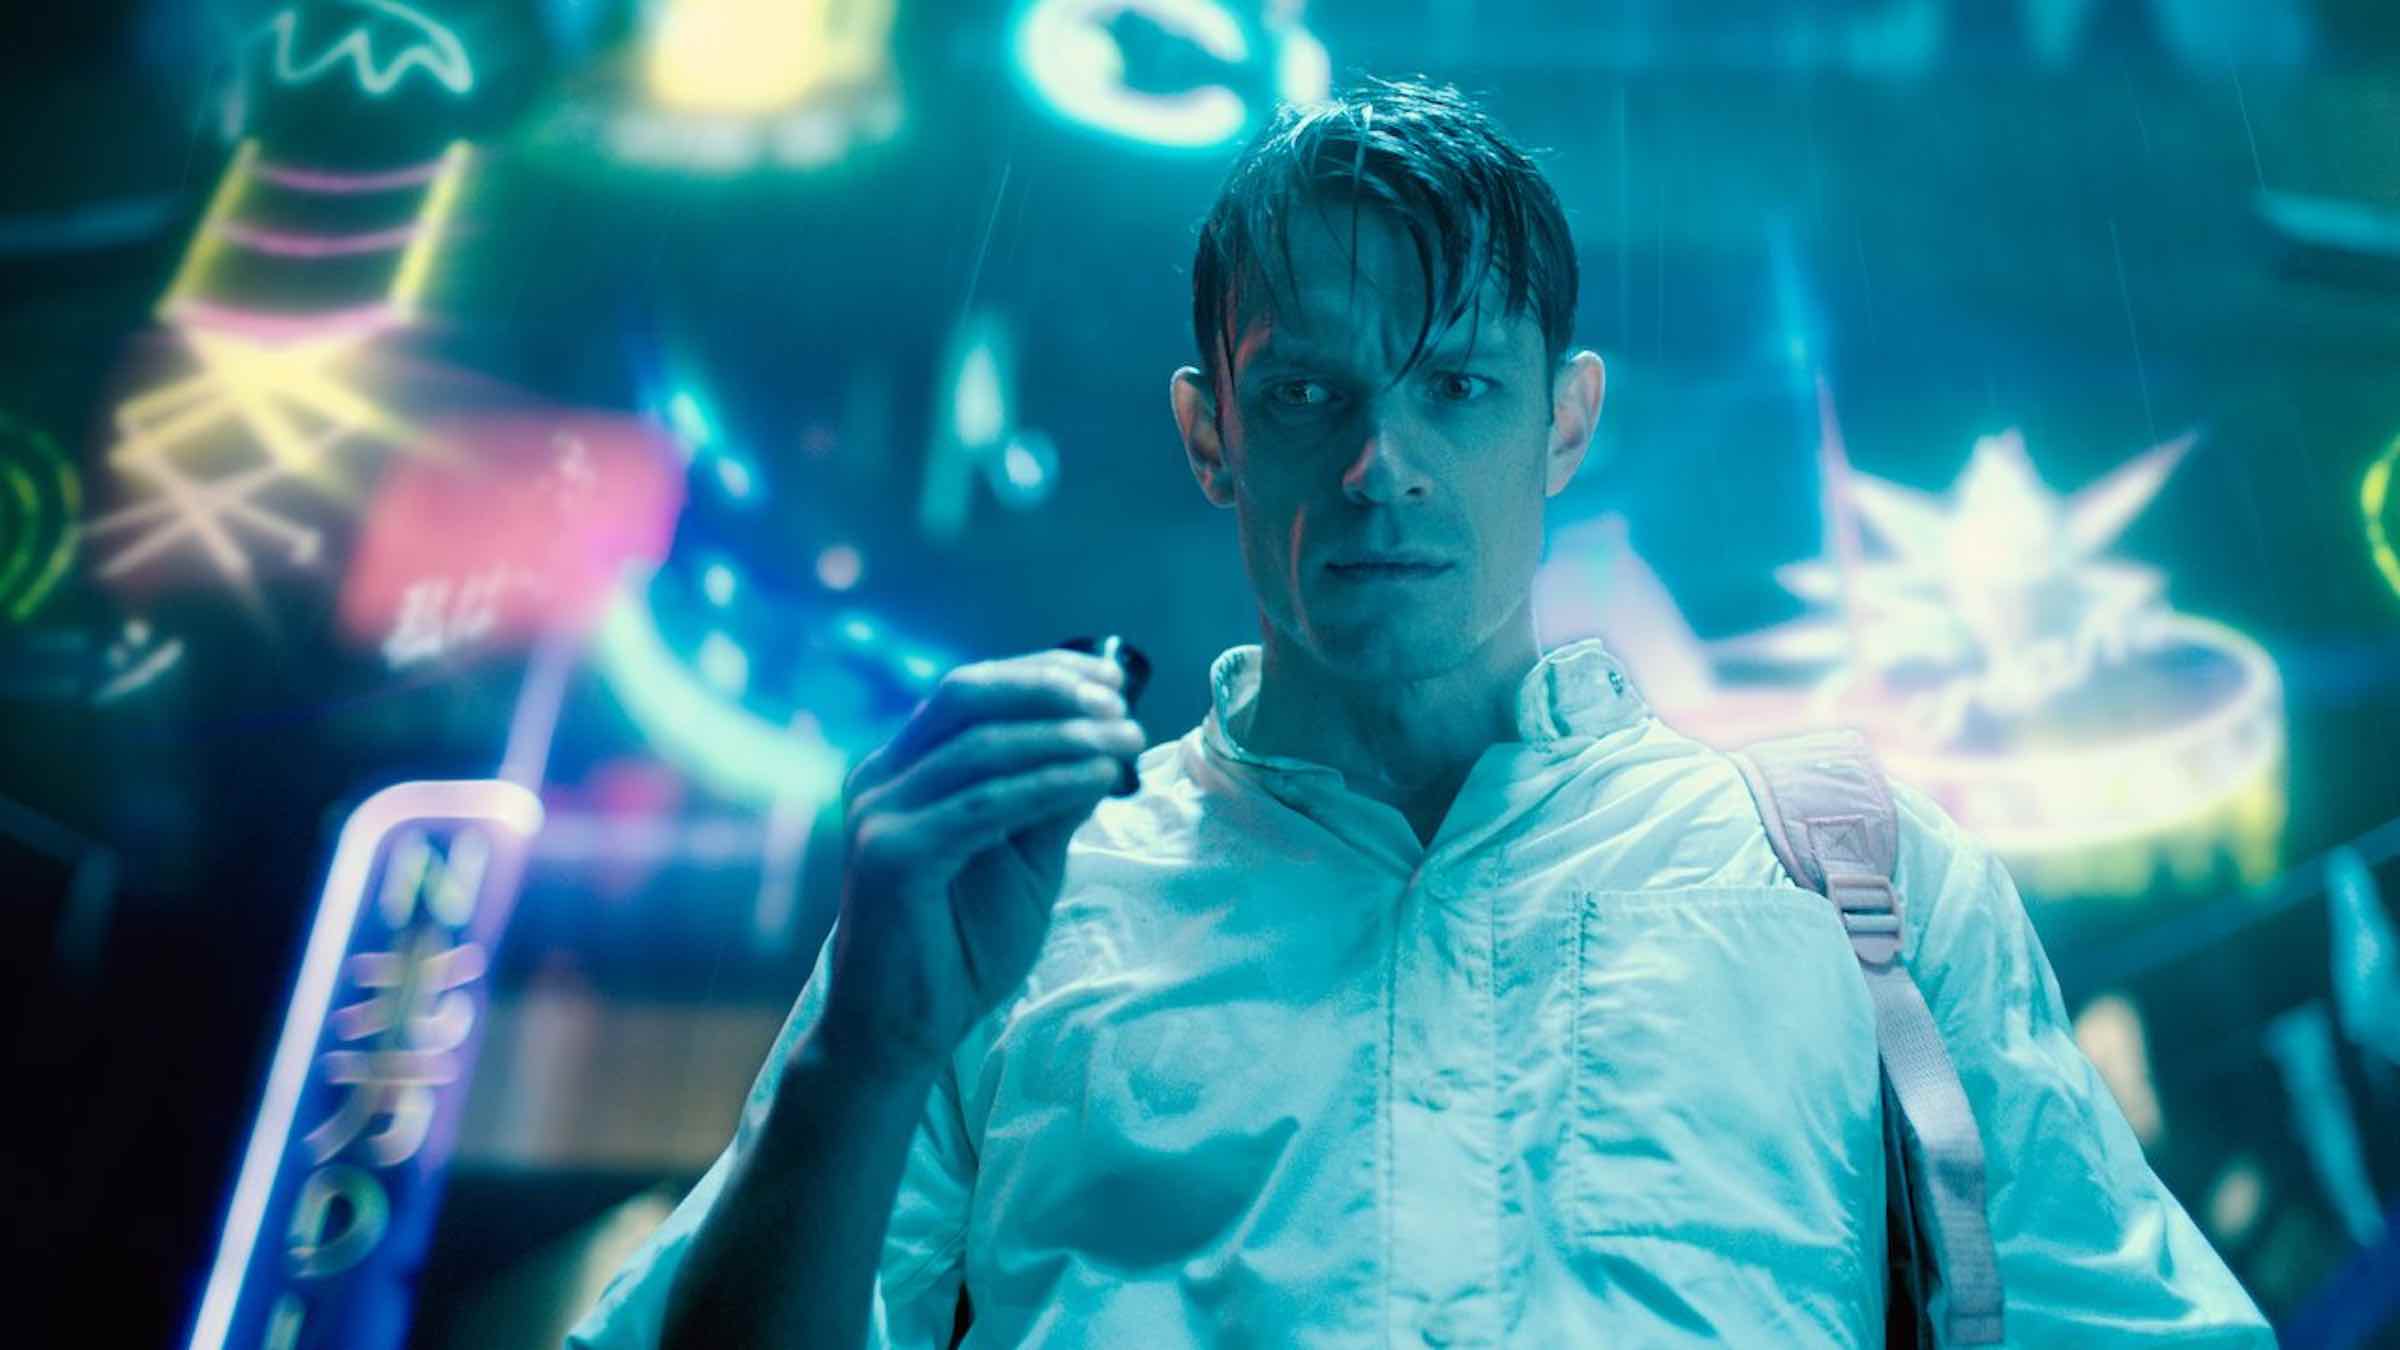 With 'Altered Carbon'’s second season weeks away, here’s everything we know about the second season of the Netflix sci-fi series.